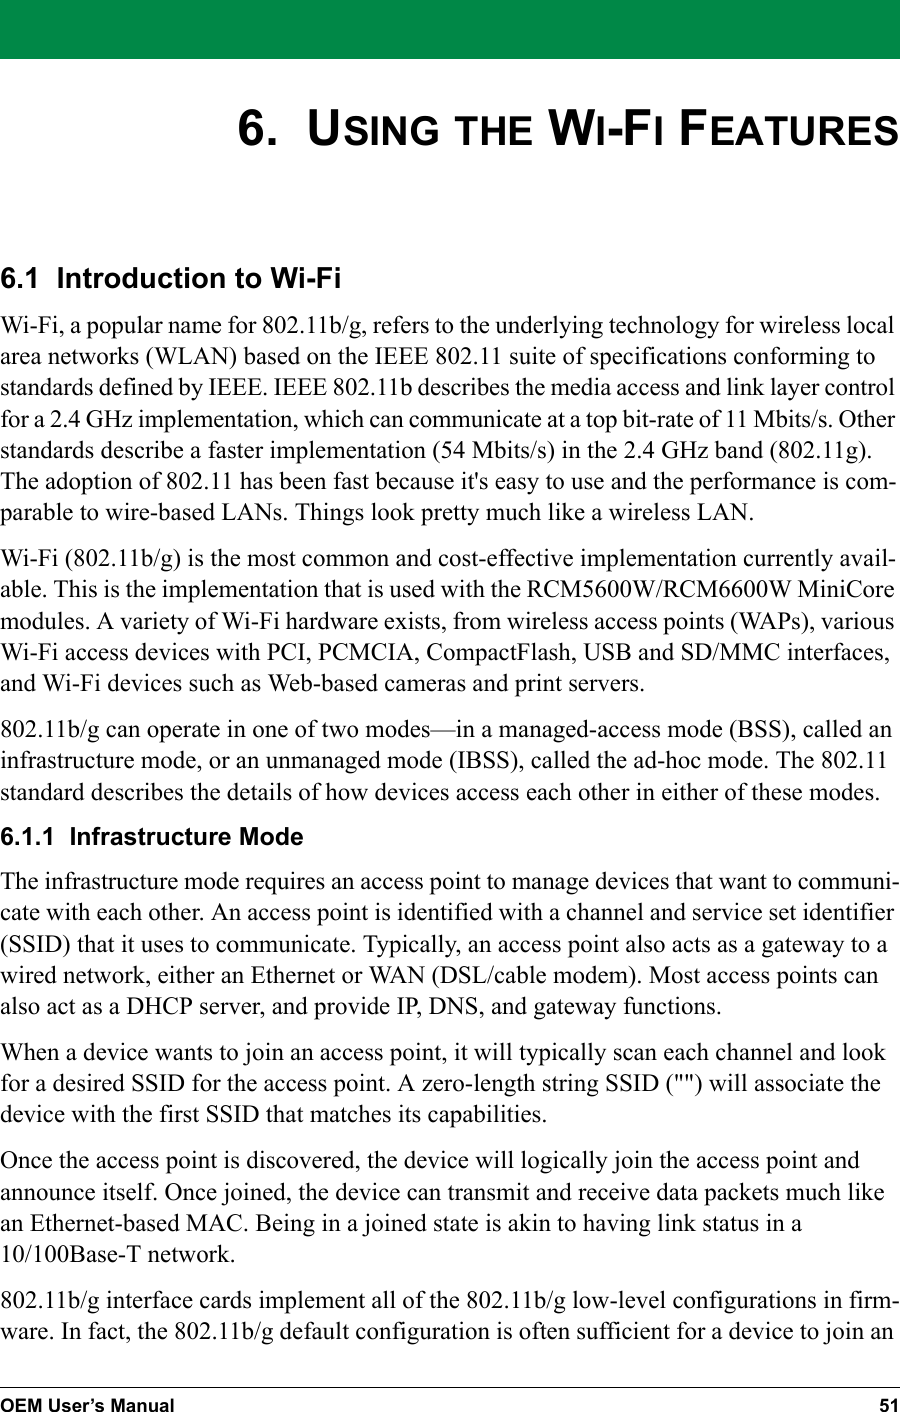 OEM User’s Manual 516.  USING THE WI-FI FEATURES6.1  Introduction to Wi-FiWi-Fi, a popular name for 802.11b/g, refers to the underlying technology for wireless local area networks (WLAN) based on the IEEE 802.11 suite of specifications conforming to standards defined by IEEE. IEEE 802.11b describes the media access and link layer control for a 2.4 GHz implementation, which can communicate at a top bit-rate of 11 Mbits/s. Other standards describe a faster implementation (54 Mbits/s) in the 2.4 GHz band (802.11g). The adoption of 802.11 has been fast because it&apos;s easy to use and the performance is com-parable to wire-based LANs. Things look pretty much like a wireless LAN.Wi-Fi (802.11b/g) is the most common and cost-effective implementation currently avail-able. This is the implementation that is used with the RCM5600W/RCM6600W MiniCore modules. A variety of Wi-Fi hardware exists, from wireless access points (WAPs), various Wi-Fi access devices with PCI, PCMCIA, CompactFlash, USB and SD/MMC interfaces, and Wi-Fi devices such as Web-based cameras and print servers.802.11b/g can operate in one of two modes—in a managed-access mode (BSS), called an infrastructure mode, or an unmanaged mode (IBSS), called the ad-hoc mode. The 802.11 standard describes the details of how devices access each other in either of these modes.6.1.1  Infrastructure ModeThe infrastructure mode requires an access point to manage devices that want to communi-cate with each other. An access point is identified with a channel and service set identifier (SSID) that it uses to communicate. Typically, an access point also acts as a gateway to a wired network, either an Ethernet or WAN (DSL/cable modem). Most access points can also act as a DHCP server, and provide IP, DNS, and gateway functions.When a device wants to join an access point, it will typically scan each channel and look for a desired SSID for the access point. A zero-length string SSID (&quot;&quot;) will associate the device with the first SSID that matches its capabilities.Once the access point is discovered, the device will logically join the access point and announce itself. Once joined, the device can transmit and receive data packets much like an Ethernet-based MAC. Being in a joined state is akin to having link status in a 10/100Base-T network.802.11b/g interface cards implement all of the 802.11b/g low-level configurations in firm-ware. In fact, the 802.11b/g default configuration is often sufficient for a device to join an 